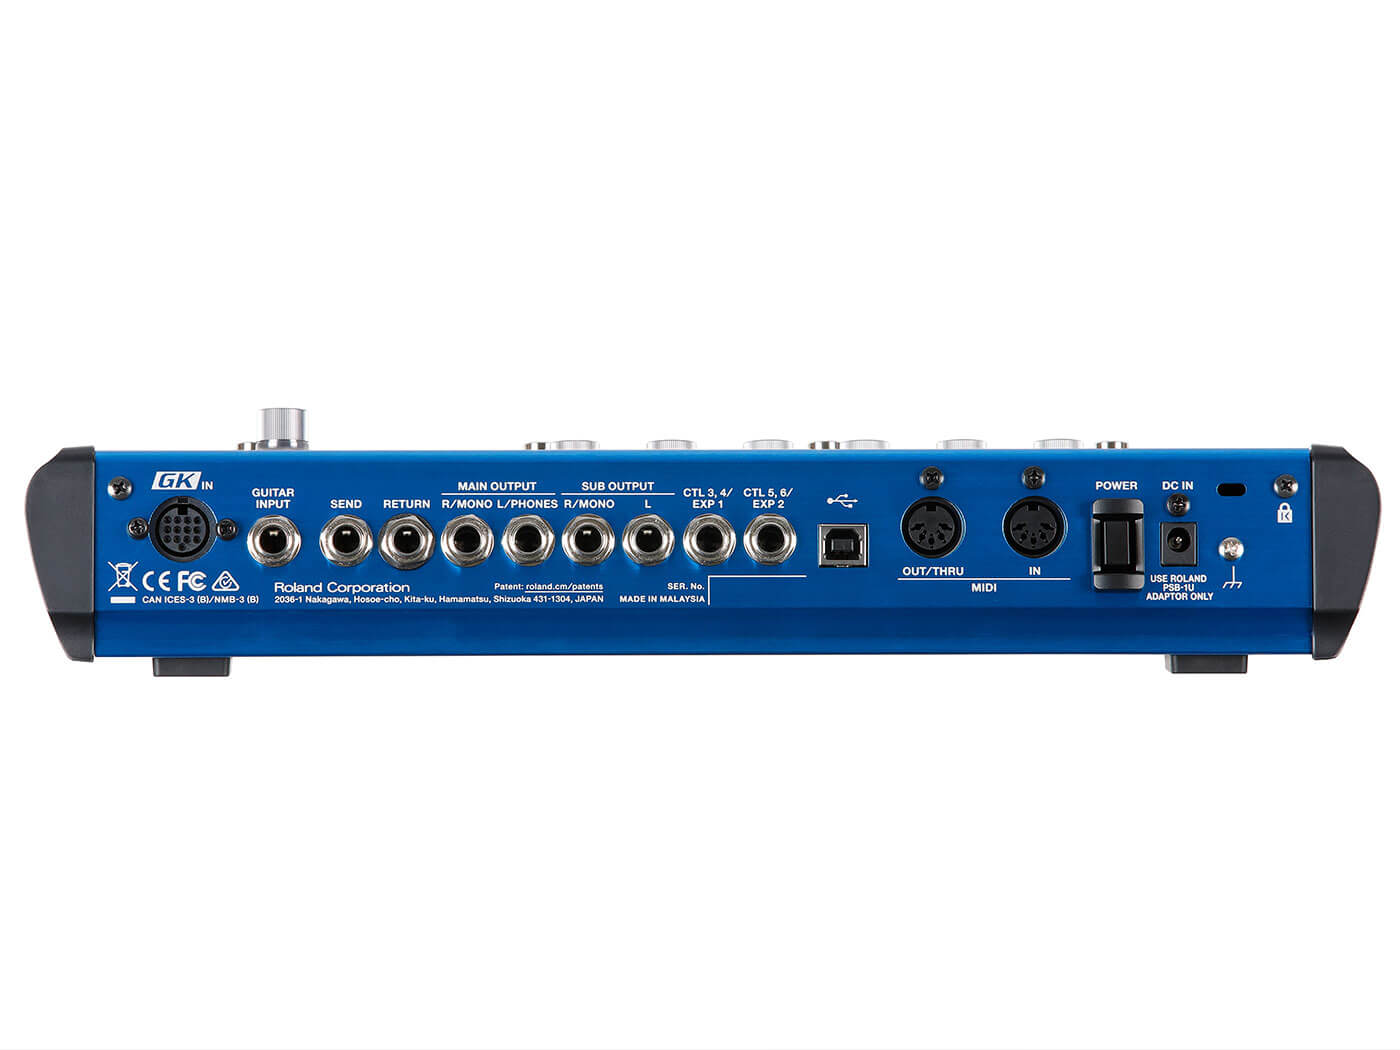 The SY-1000's extensive I/O panel.